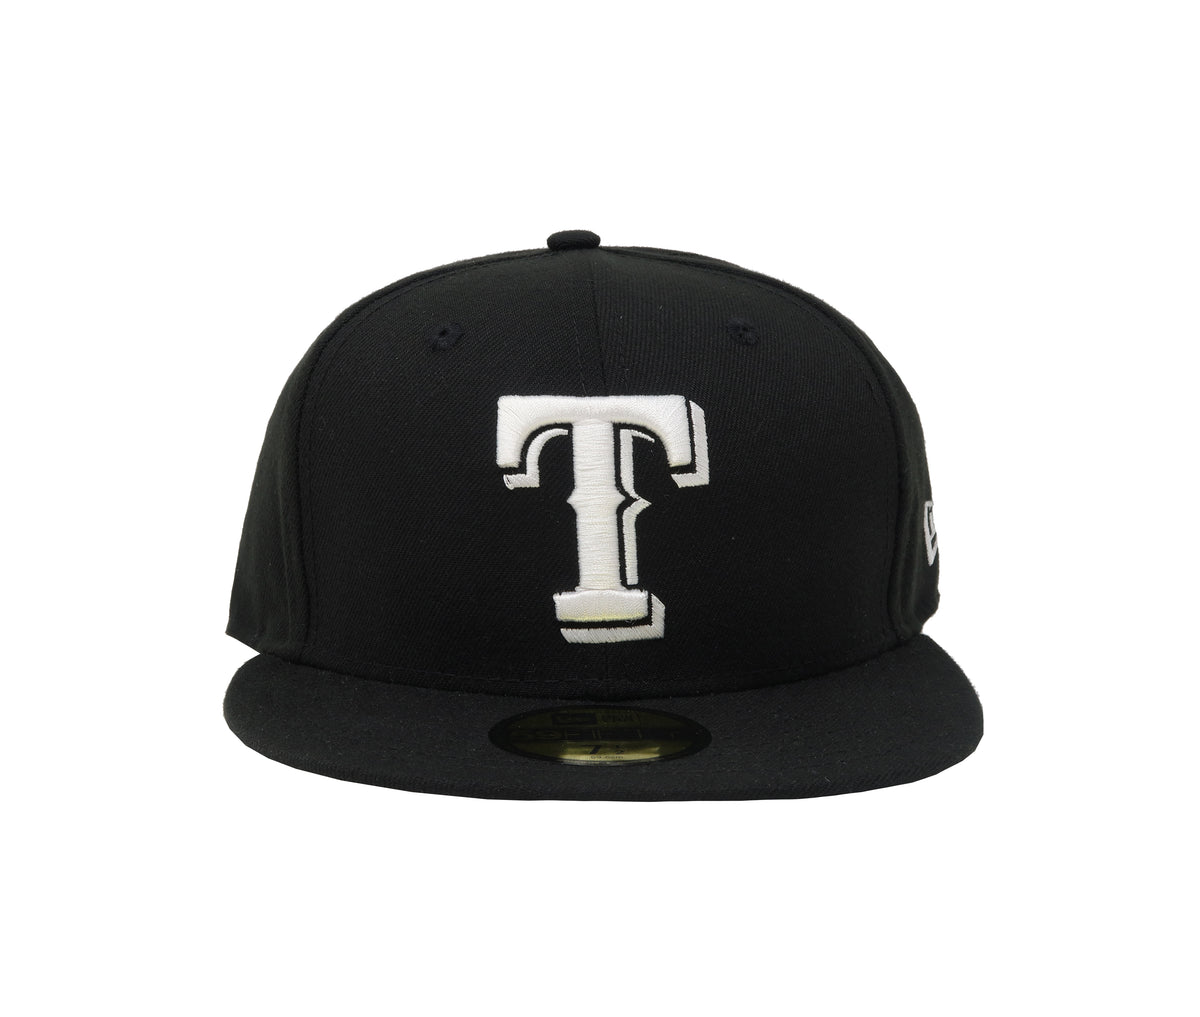 New Era Texas Rangers Basic Black & White 59fifty Fitted Cap – The